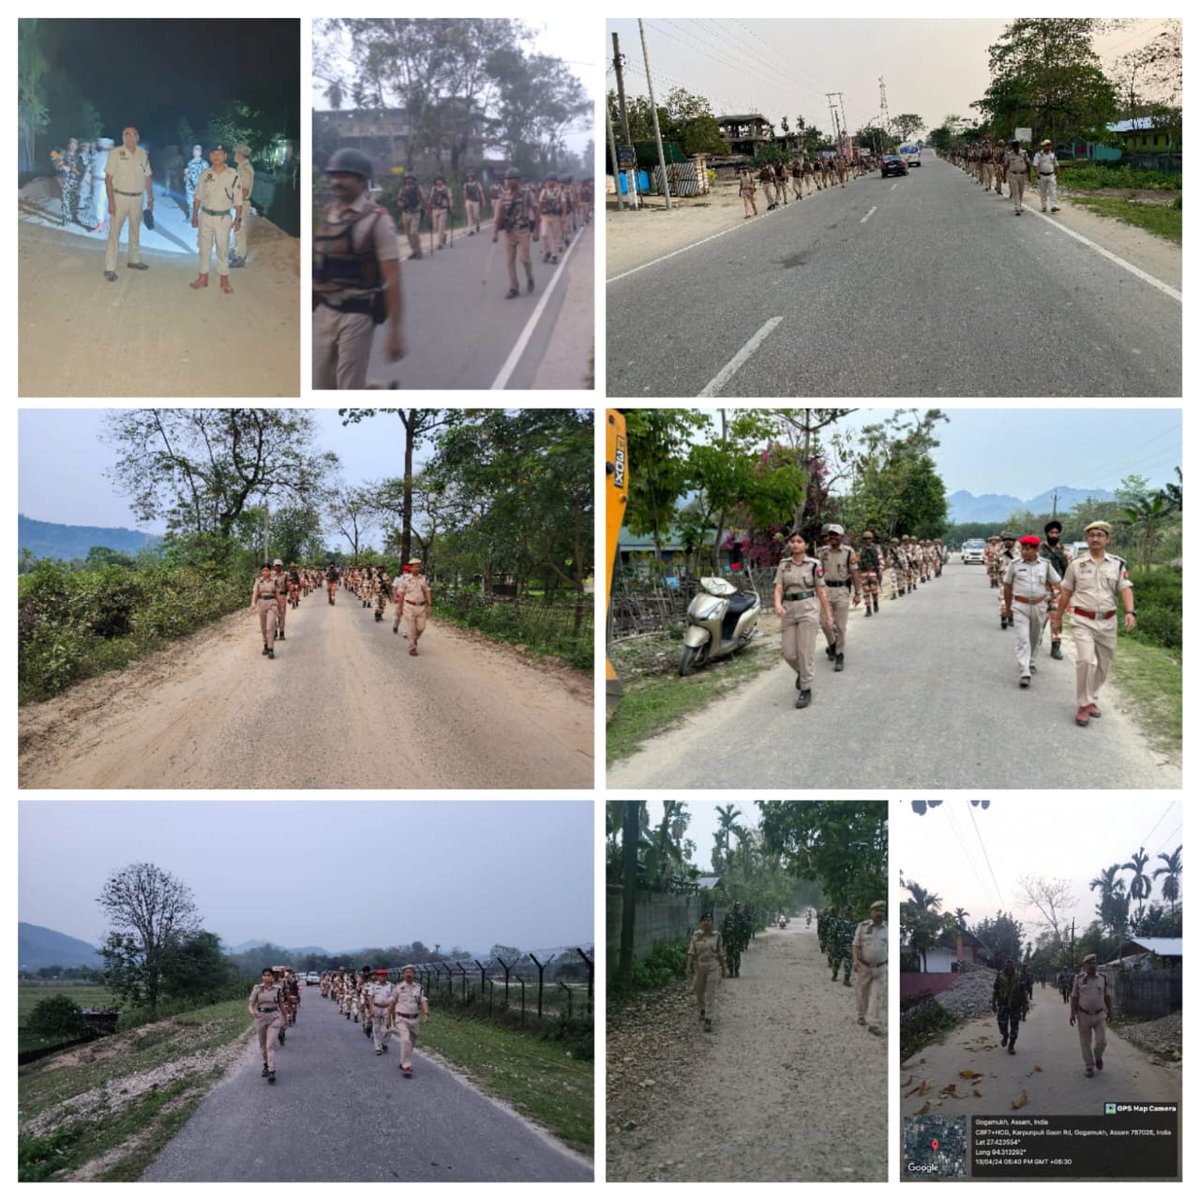 Area domination and foot Patrolling conducted by Dhemaji Police along with CAPF staff for maintenance of peace and to ensure Law & Order in various areas of the district. @assampolice @DGPAssamPolice @gpsinghips @HardiSpeaks